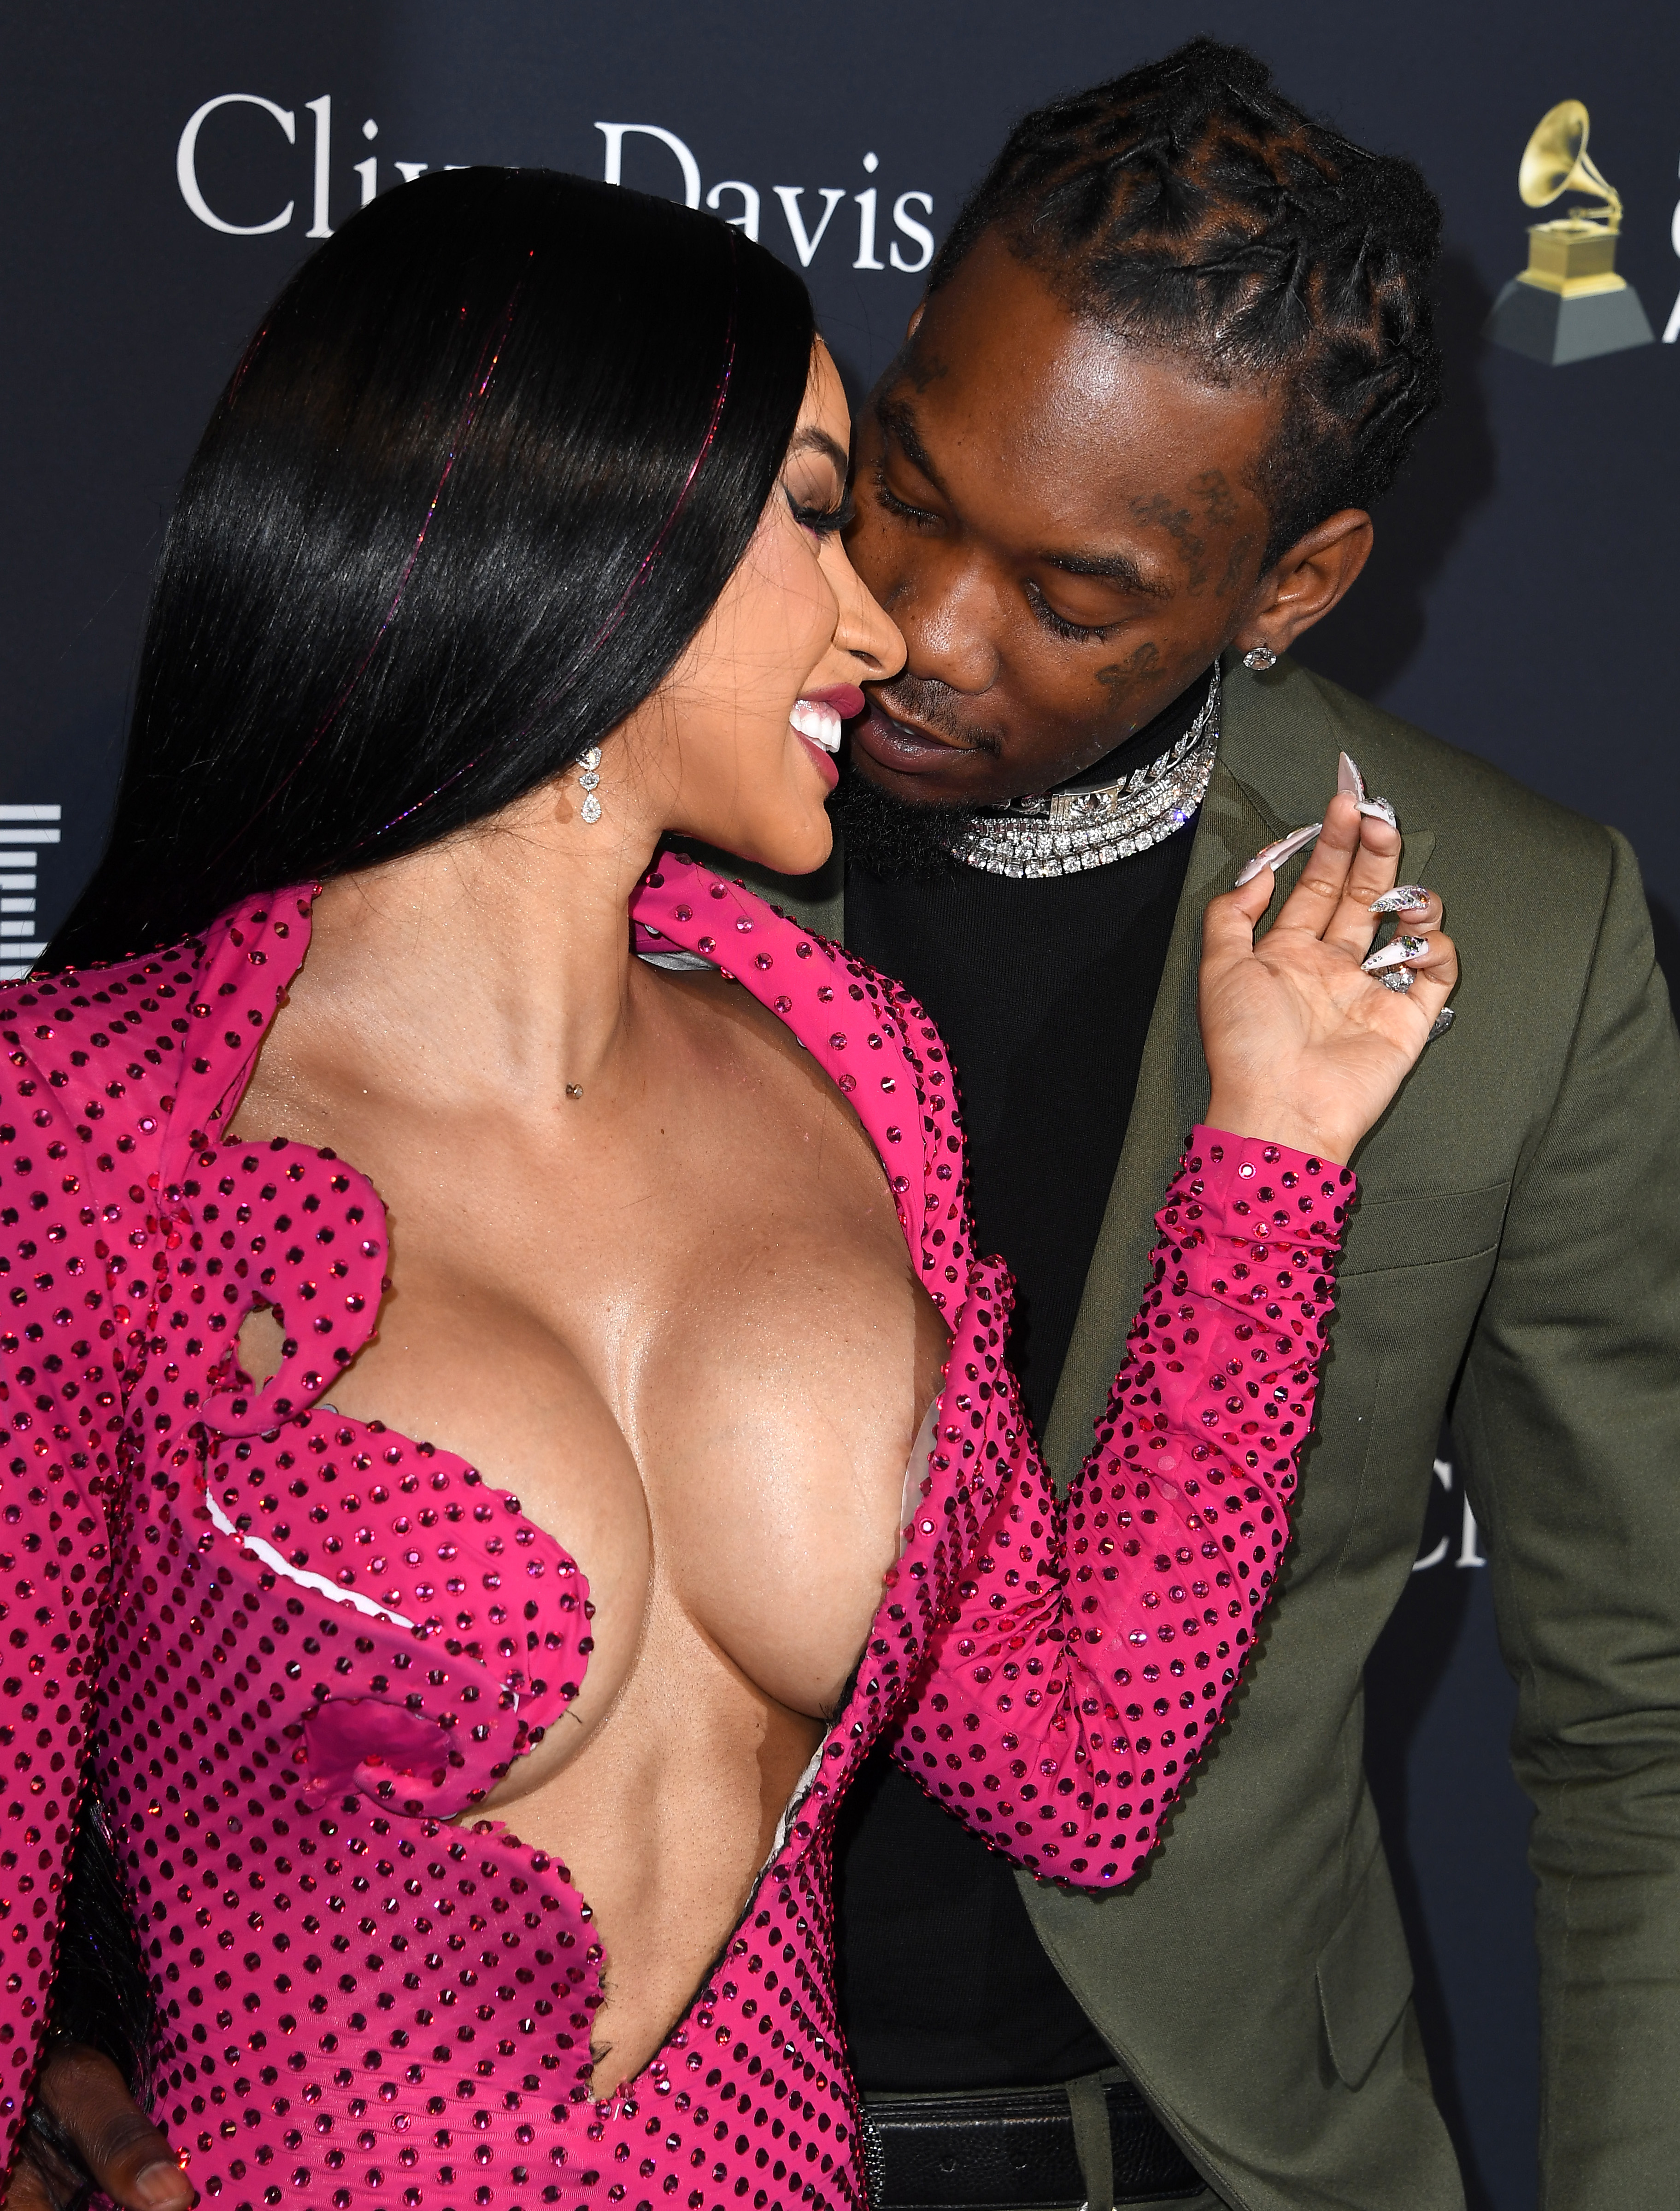 Cardi B and Offset sharing an intimate moment at the Pre-Grammy Gala in Beverly Hills in January 2020